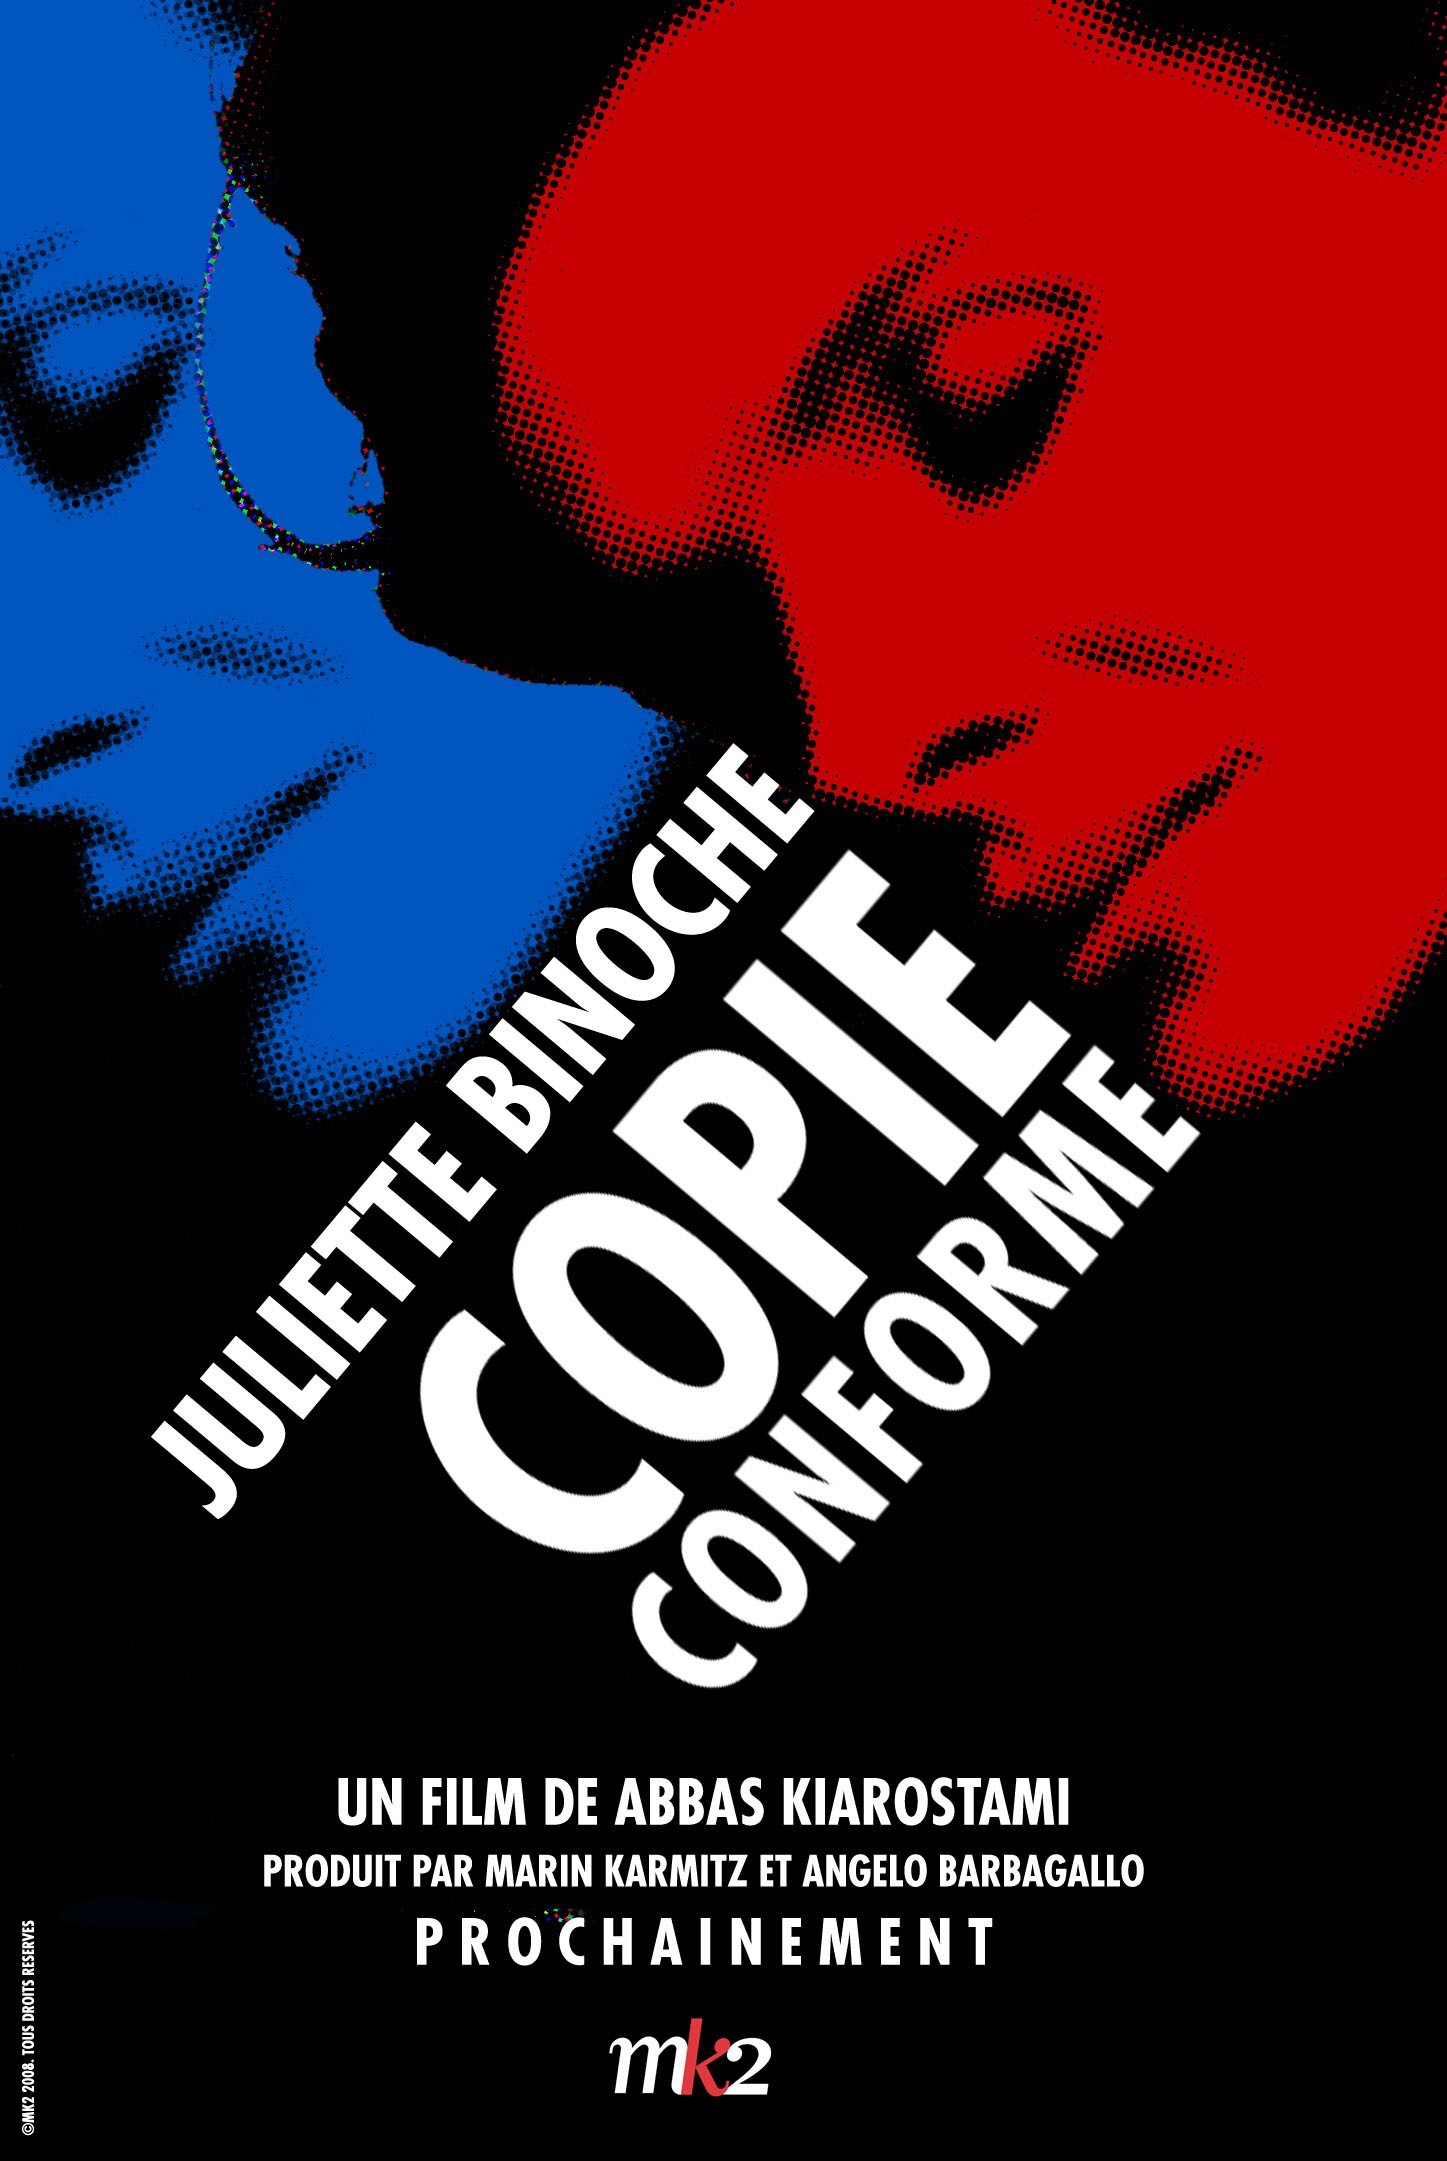 Mega Sized Movie Poster Image for Copie conforme (#6 of 9)